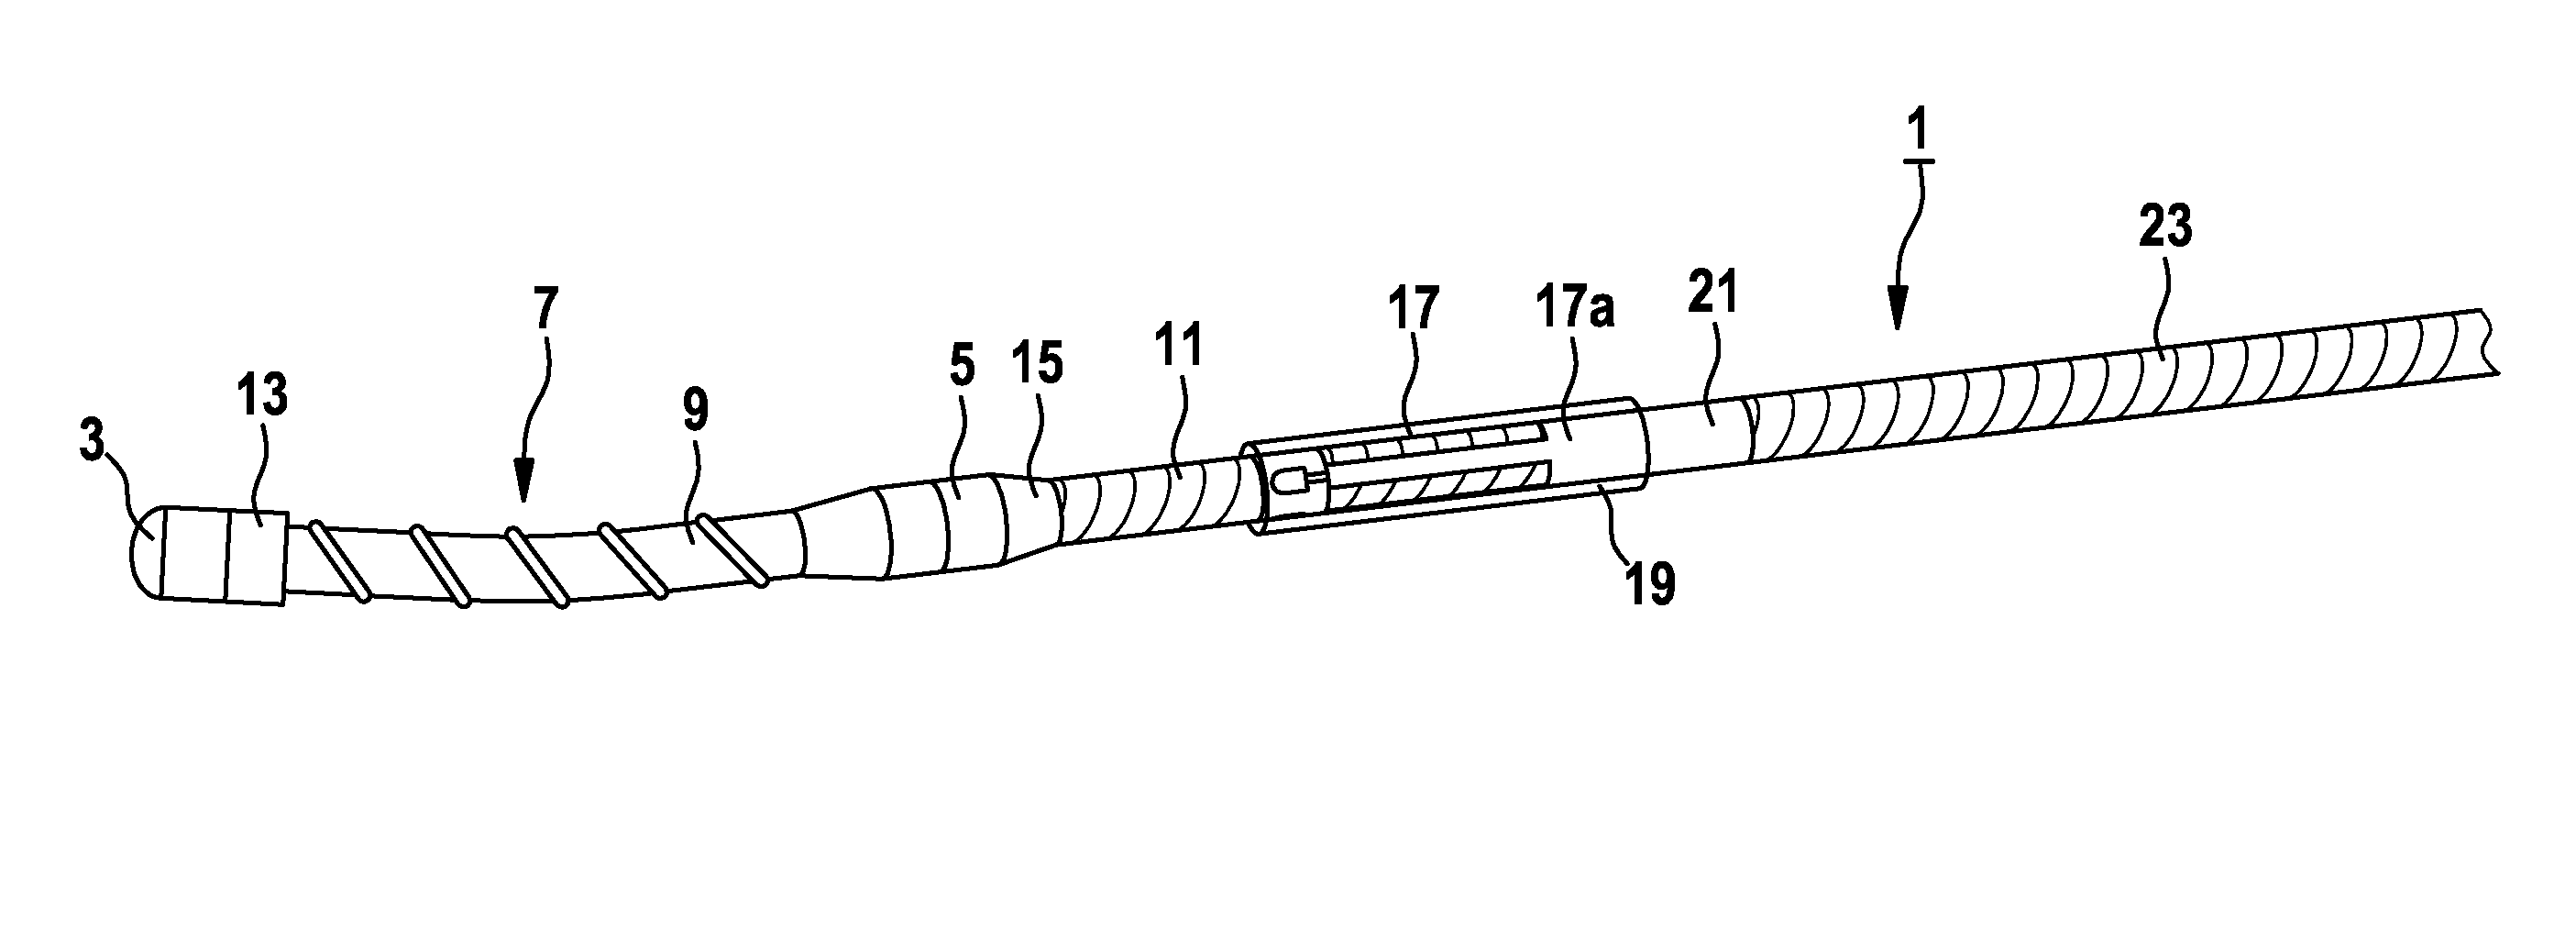 Implantable catheter lead or electrode lead